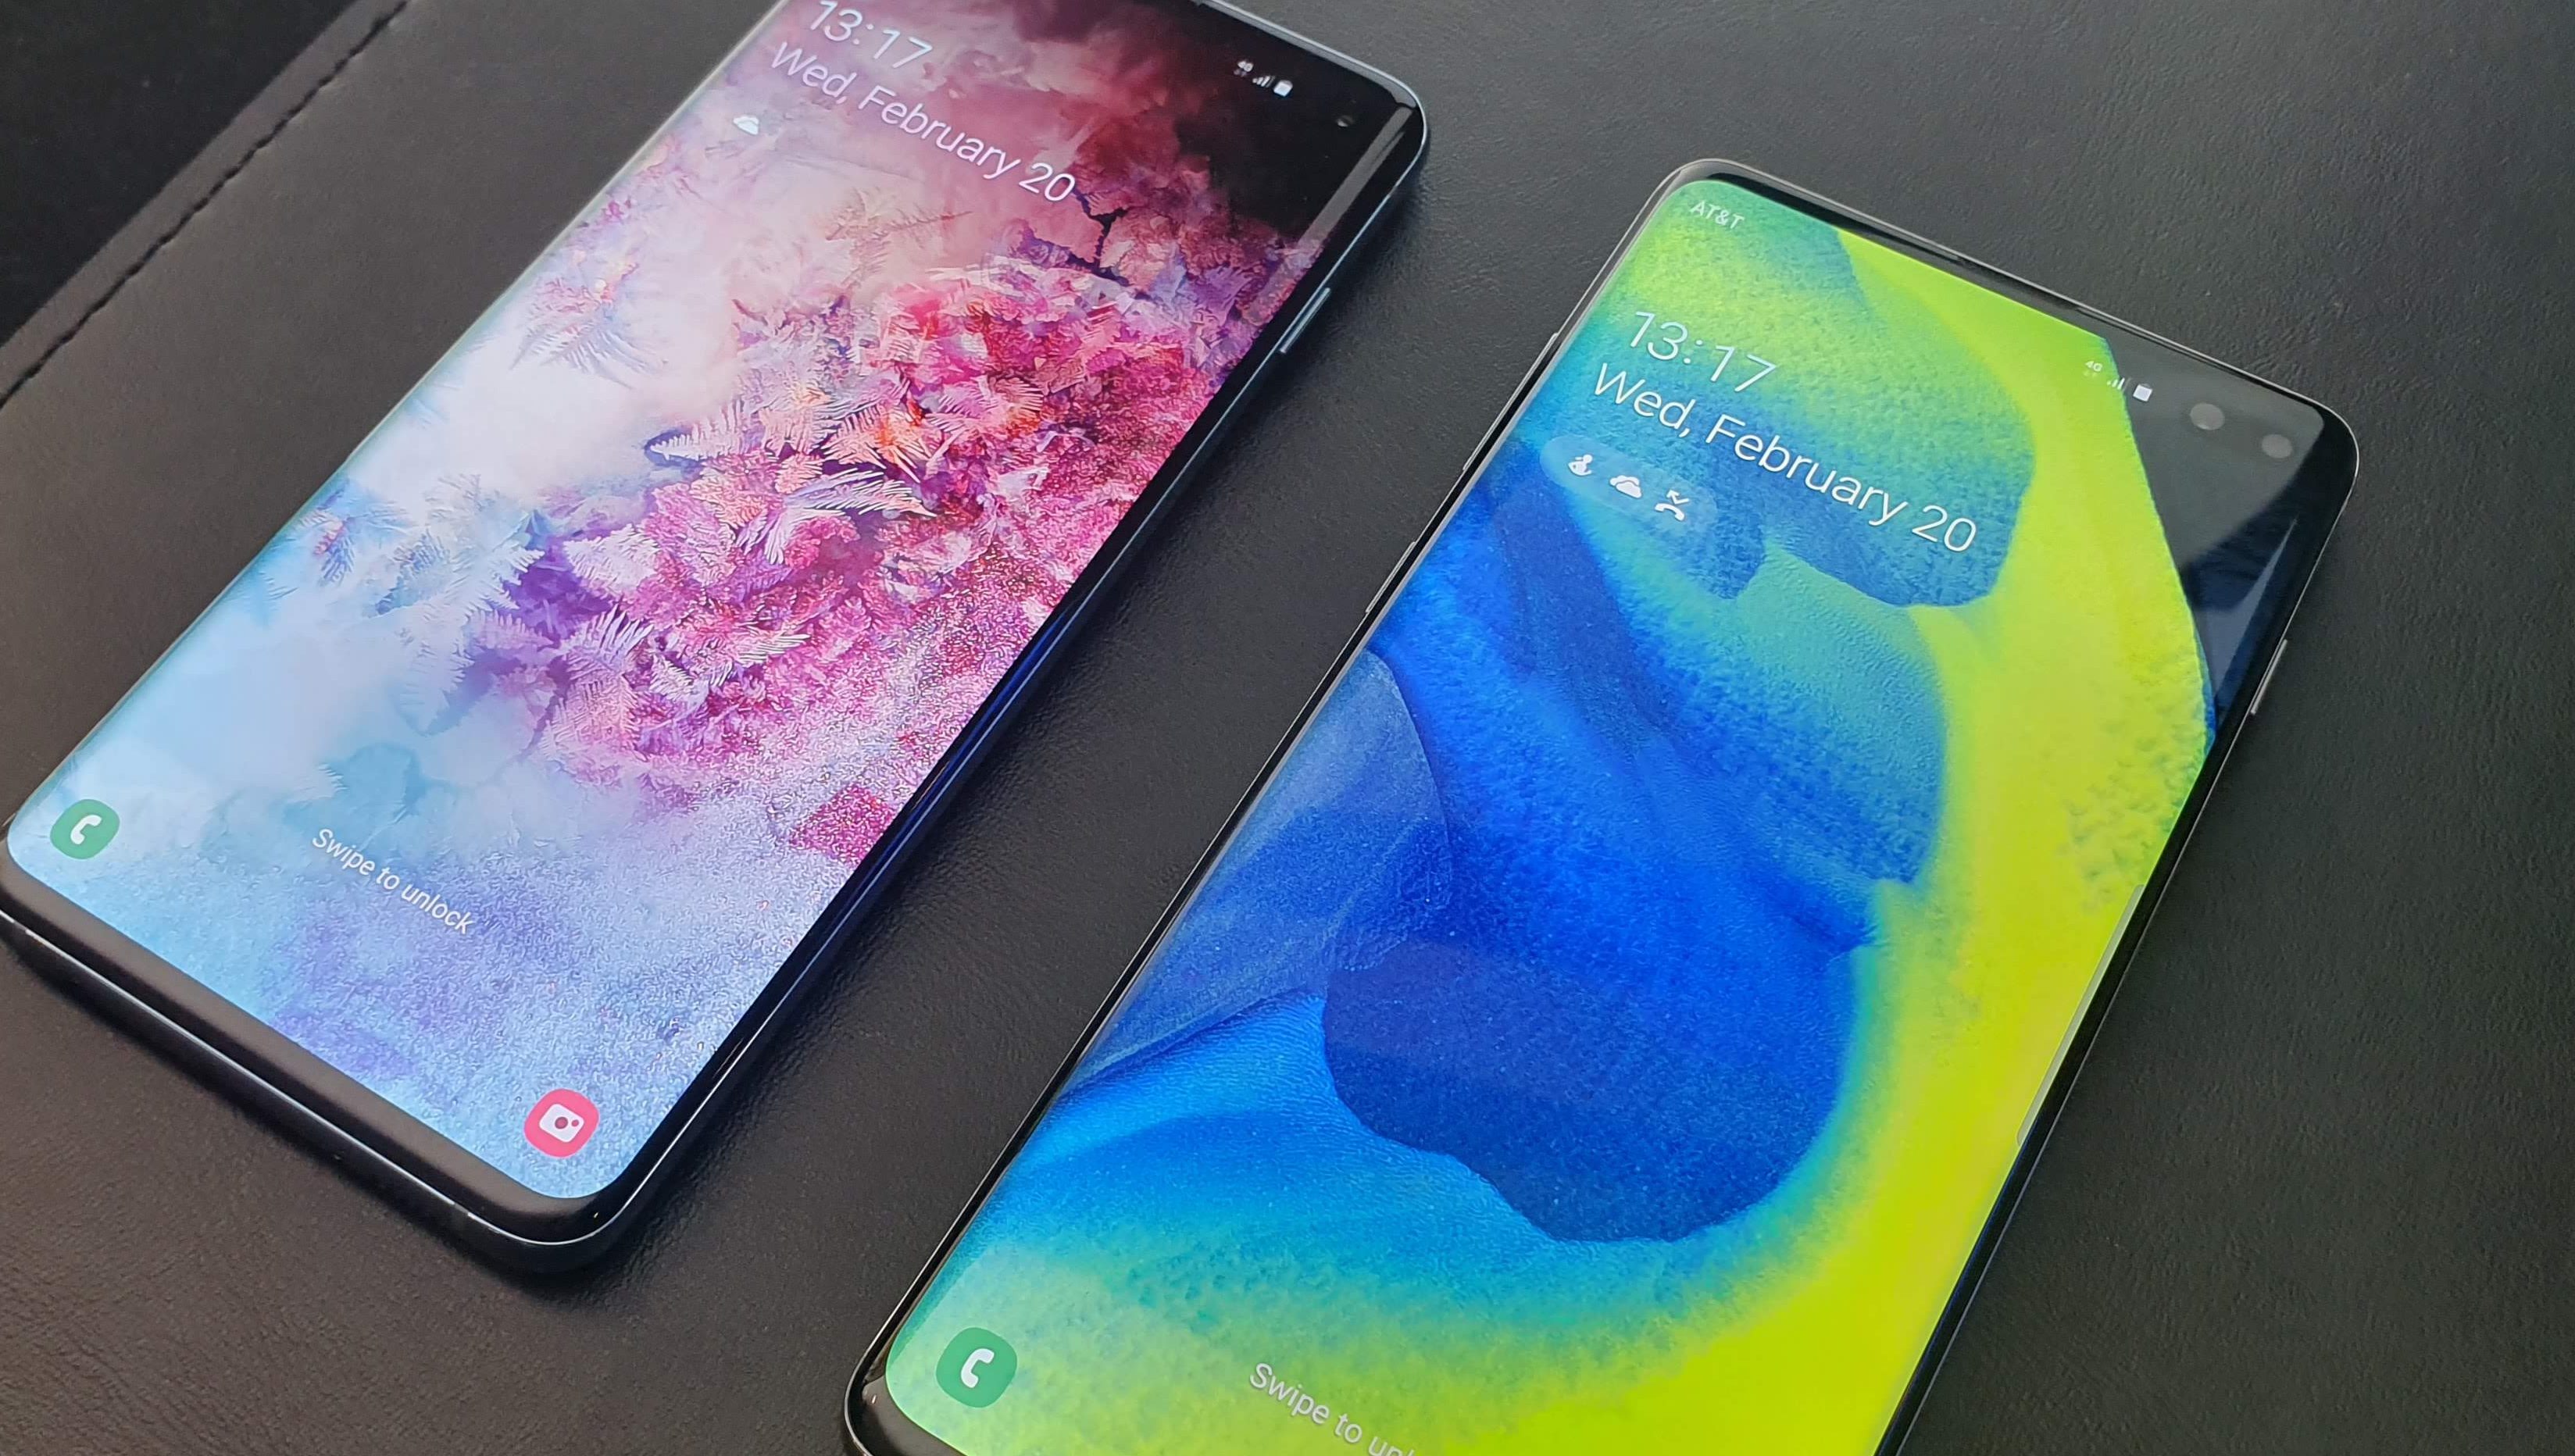 Customize your smartphone with the Samsung Galaxy S10 wallpapers